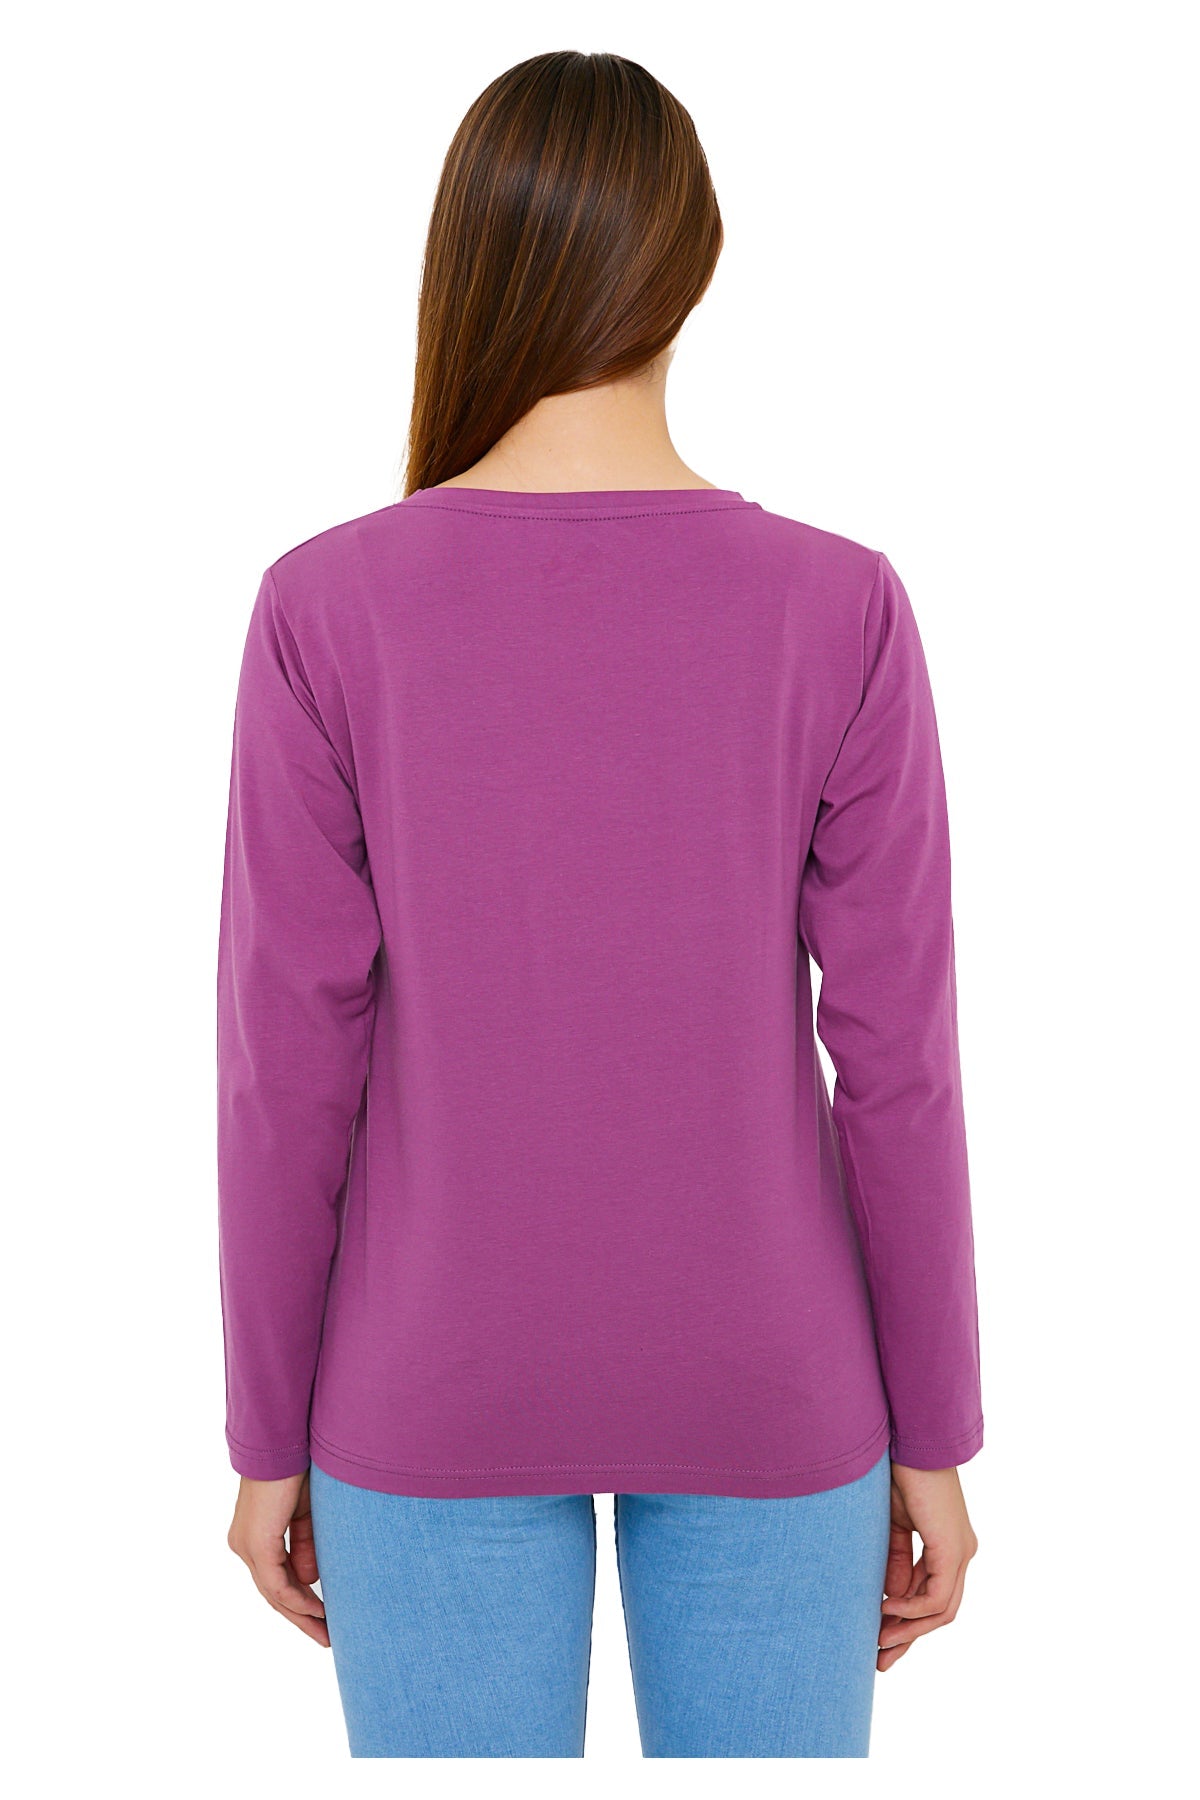 Long Sleeve V Neck T-Shirts for Women & Girls - Colorful Pima Cotton